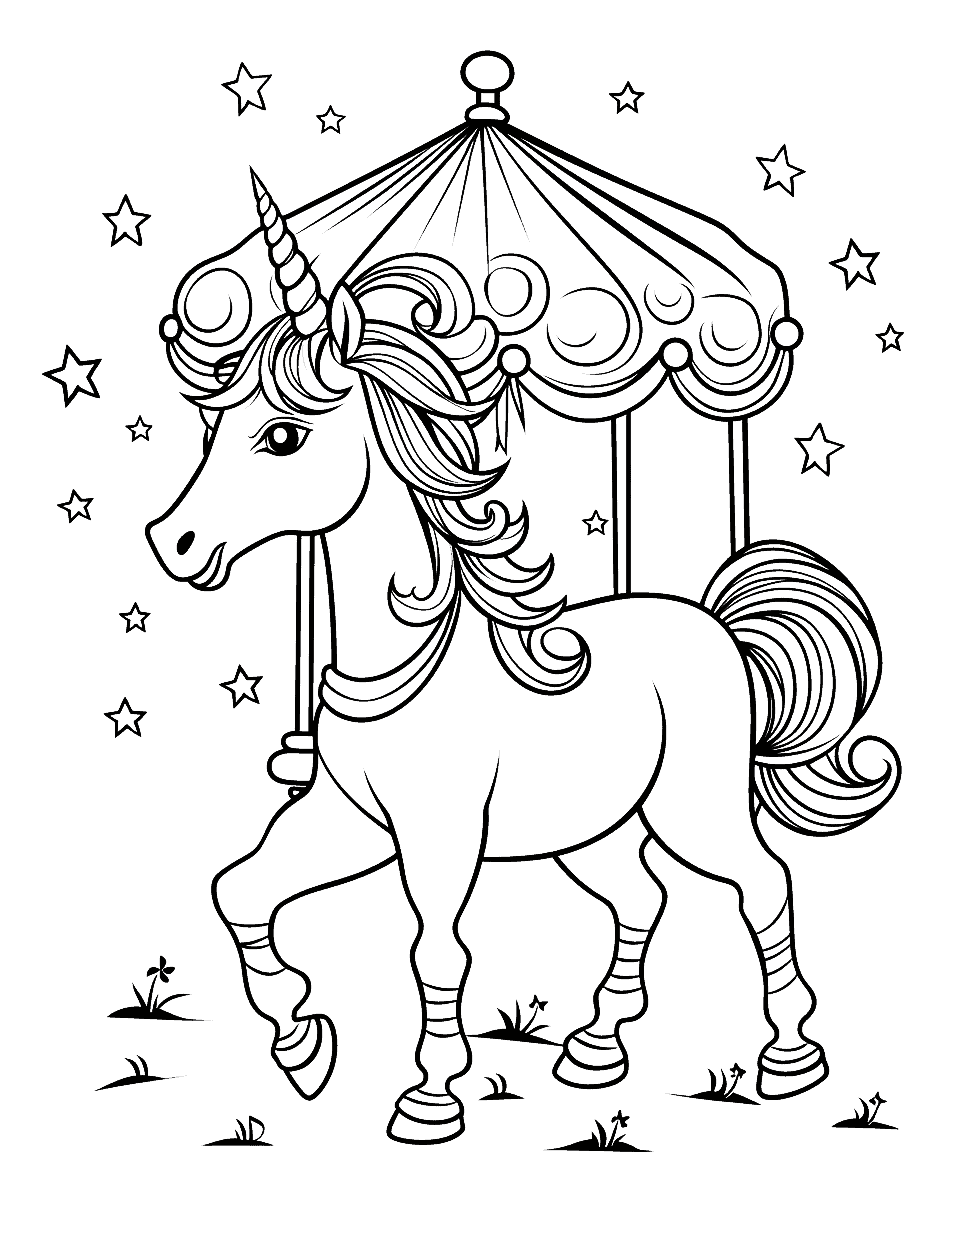 Unicorn Carousel Coloring Page - A unicorn on a merry-go-round.